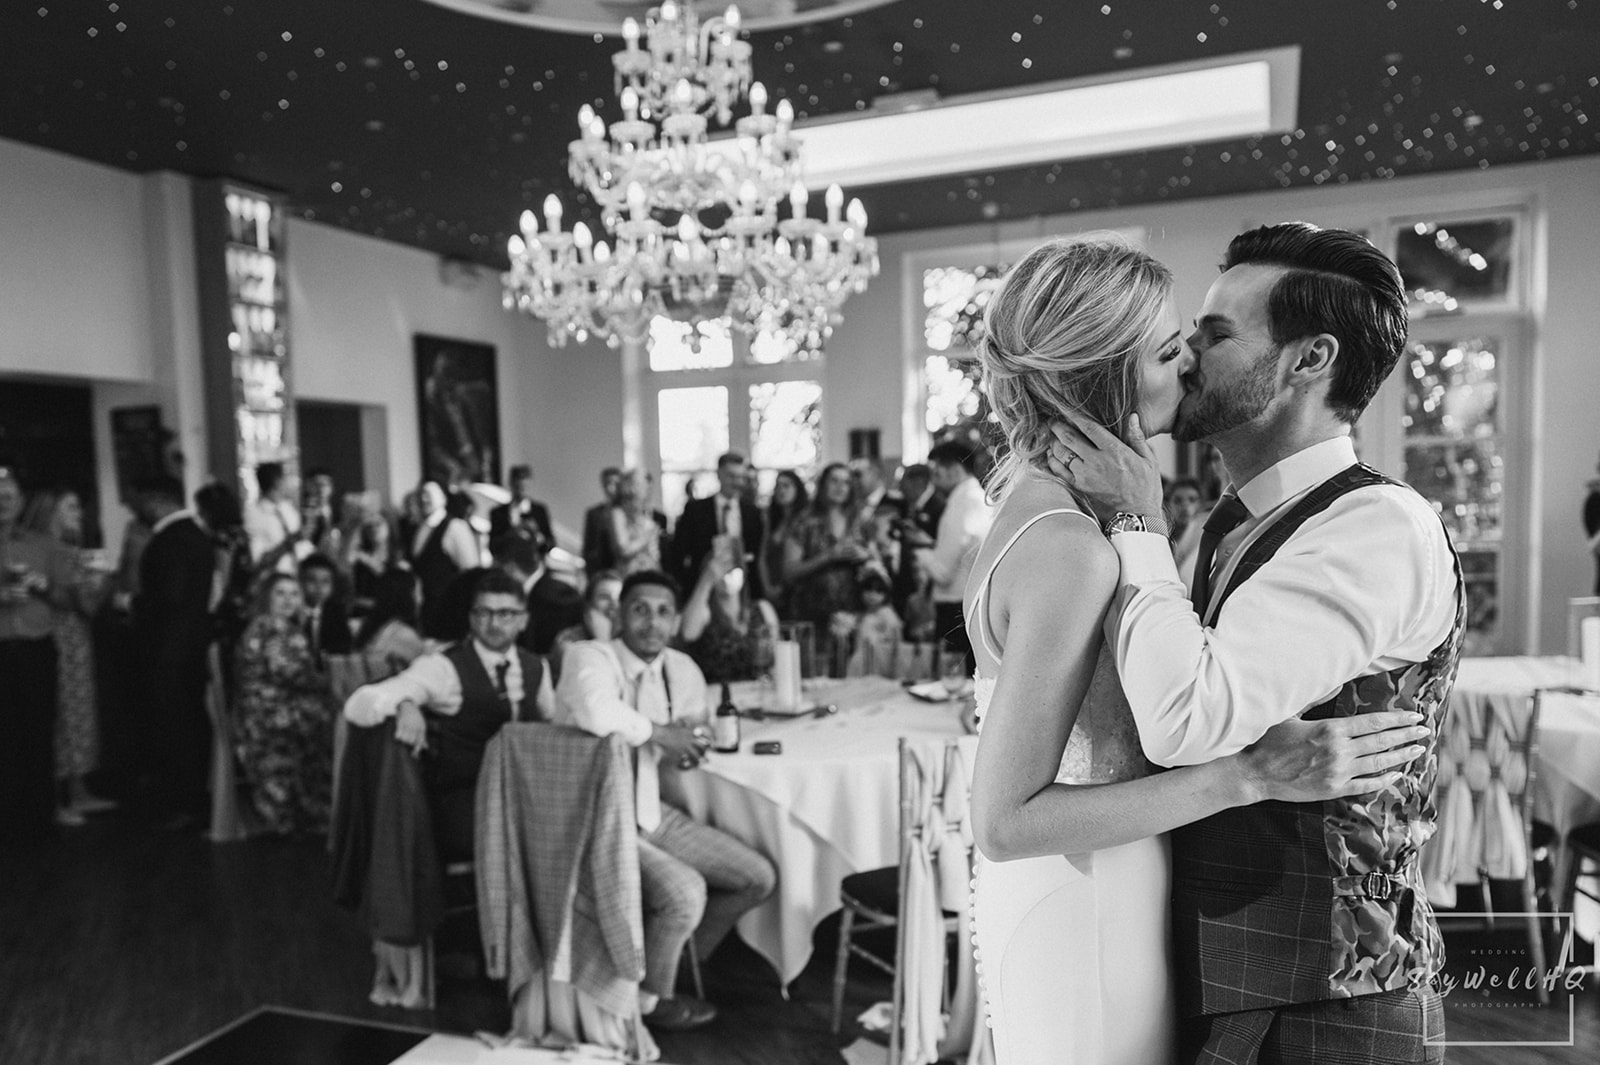 Wedding Photography First dance photos - 
Bride and groom kiss during the first dance